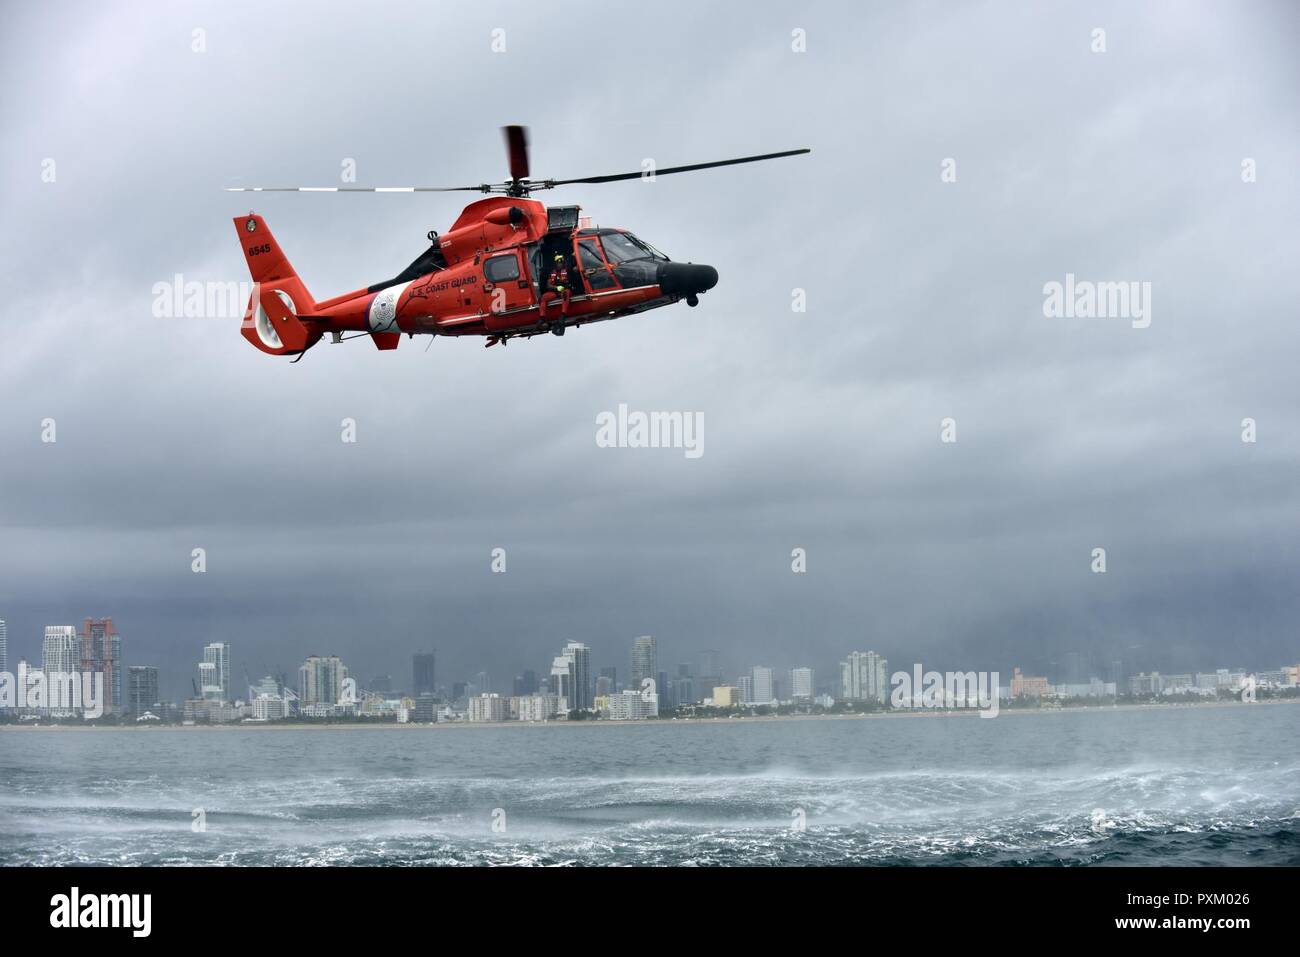 Petty Officer 3rd Class Bryan Evans, a Coast Guard Air Station Miami rescue swimmer, prepares for a free fall deployment from a MH-65 Dolphin helicopter east of Miami Beach on June 6, 2017. (Coast Guard Stock Photo